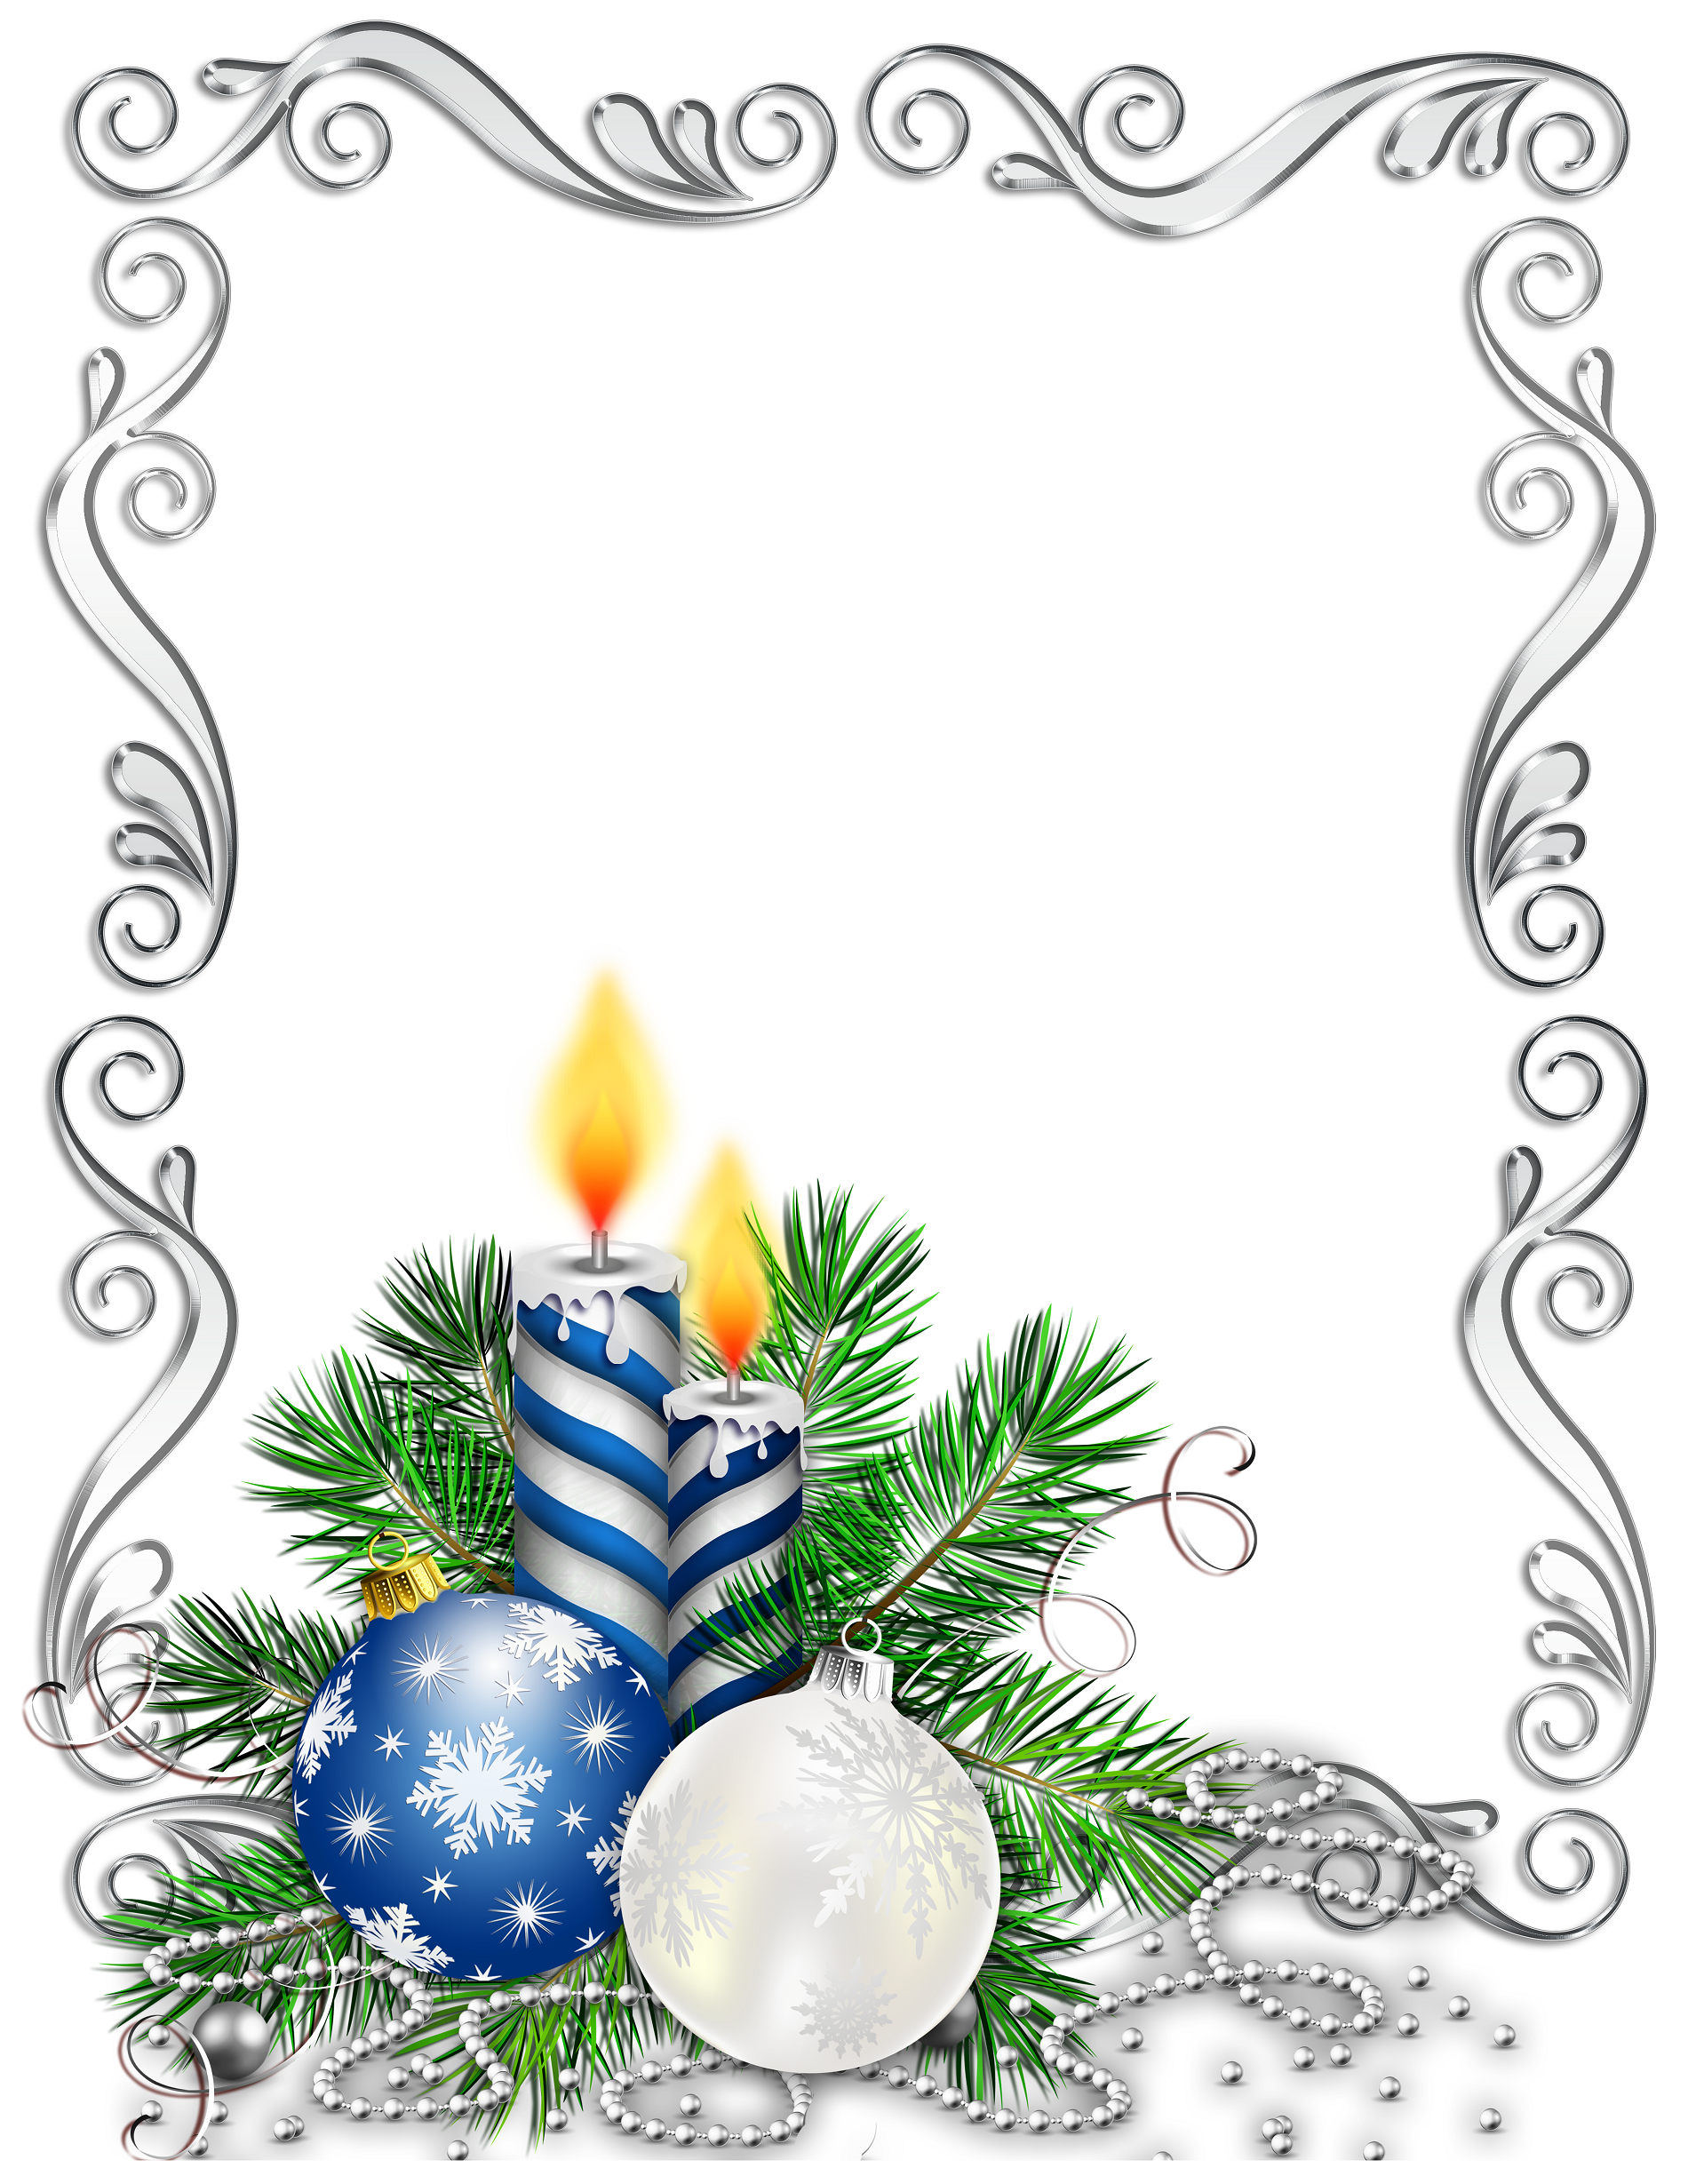 Pin By Janice Schachner On Christmas Clip Art   Pinterest